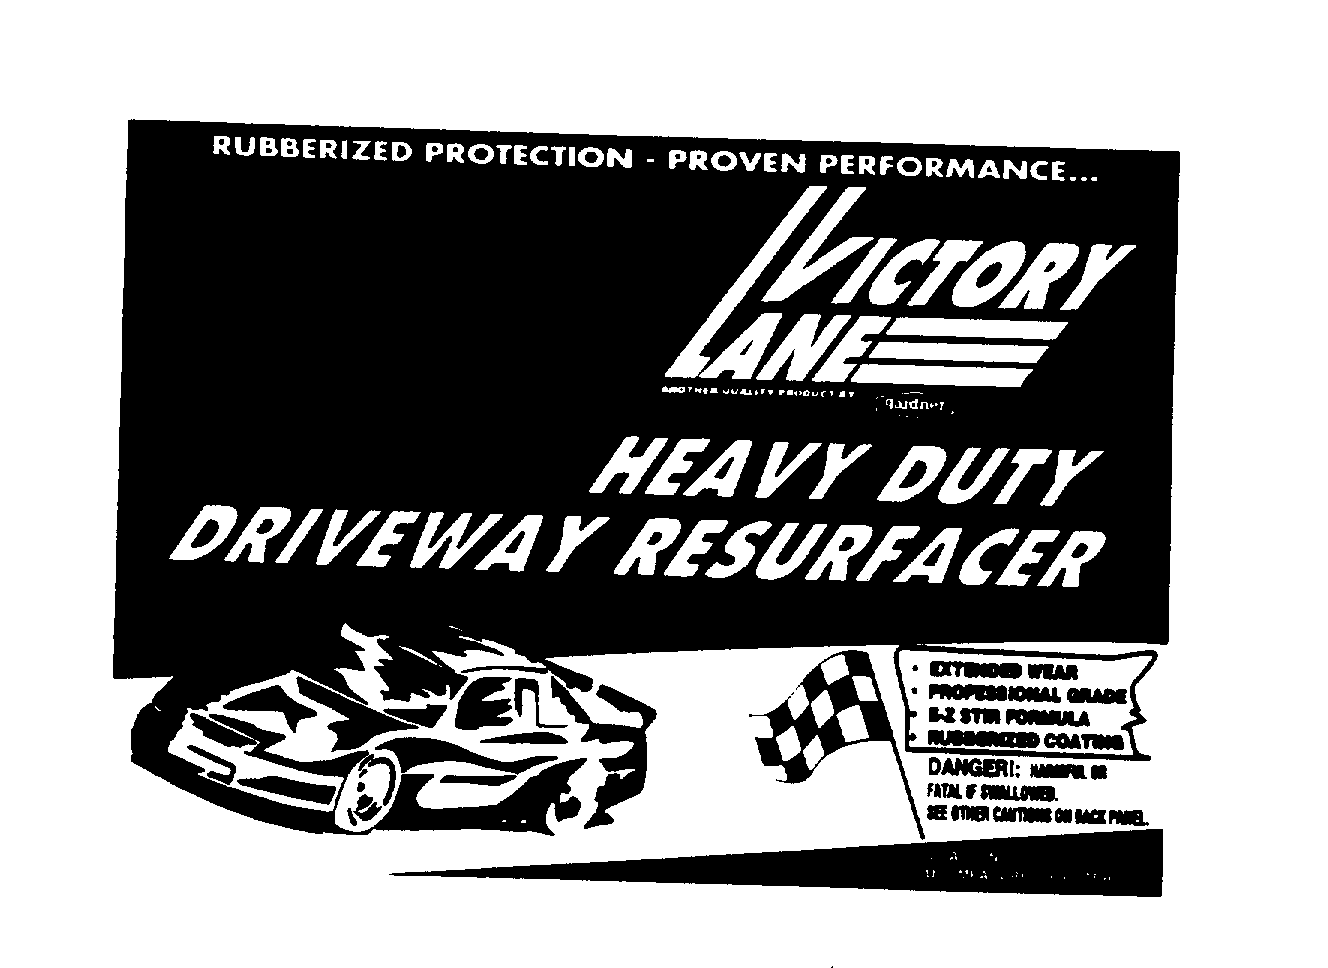 Trademark Logo VICTORY LANE HEAVY DUTY DRIVEWAY RESURFACER RUBBERIZED PROTECTION - PROVEN PERFORMANCE... ANOTHER QUALITY PRODUCT BY: GARDNER EXTENDED WEAR PROFESSIONAL GRADE E-Z STIR FORMULA RUBBERIZED COATING DANGER!: HARMFUL OR FATAL IF SWALLOWED. SEE OTHER CAUTIONS ON BACK PANEL. 5 GALLONS U.S. MEASURE (18.9 LITERS)